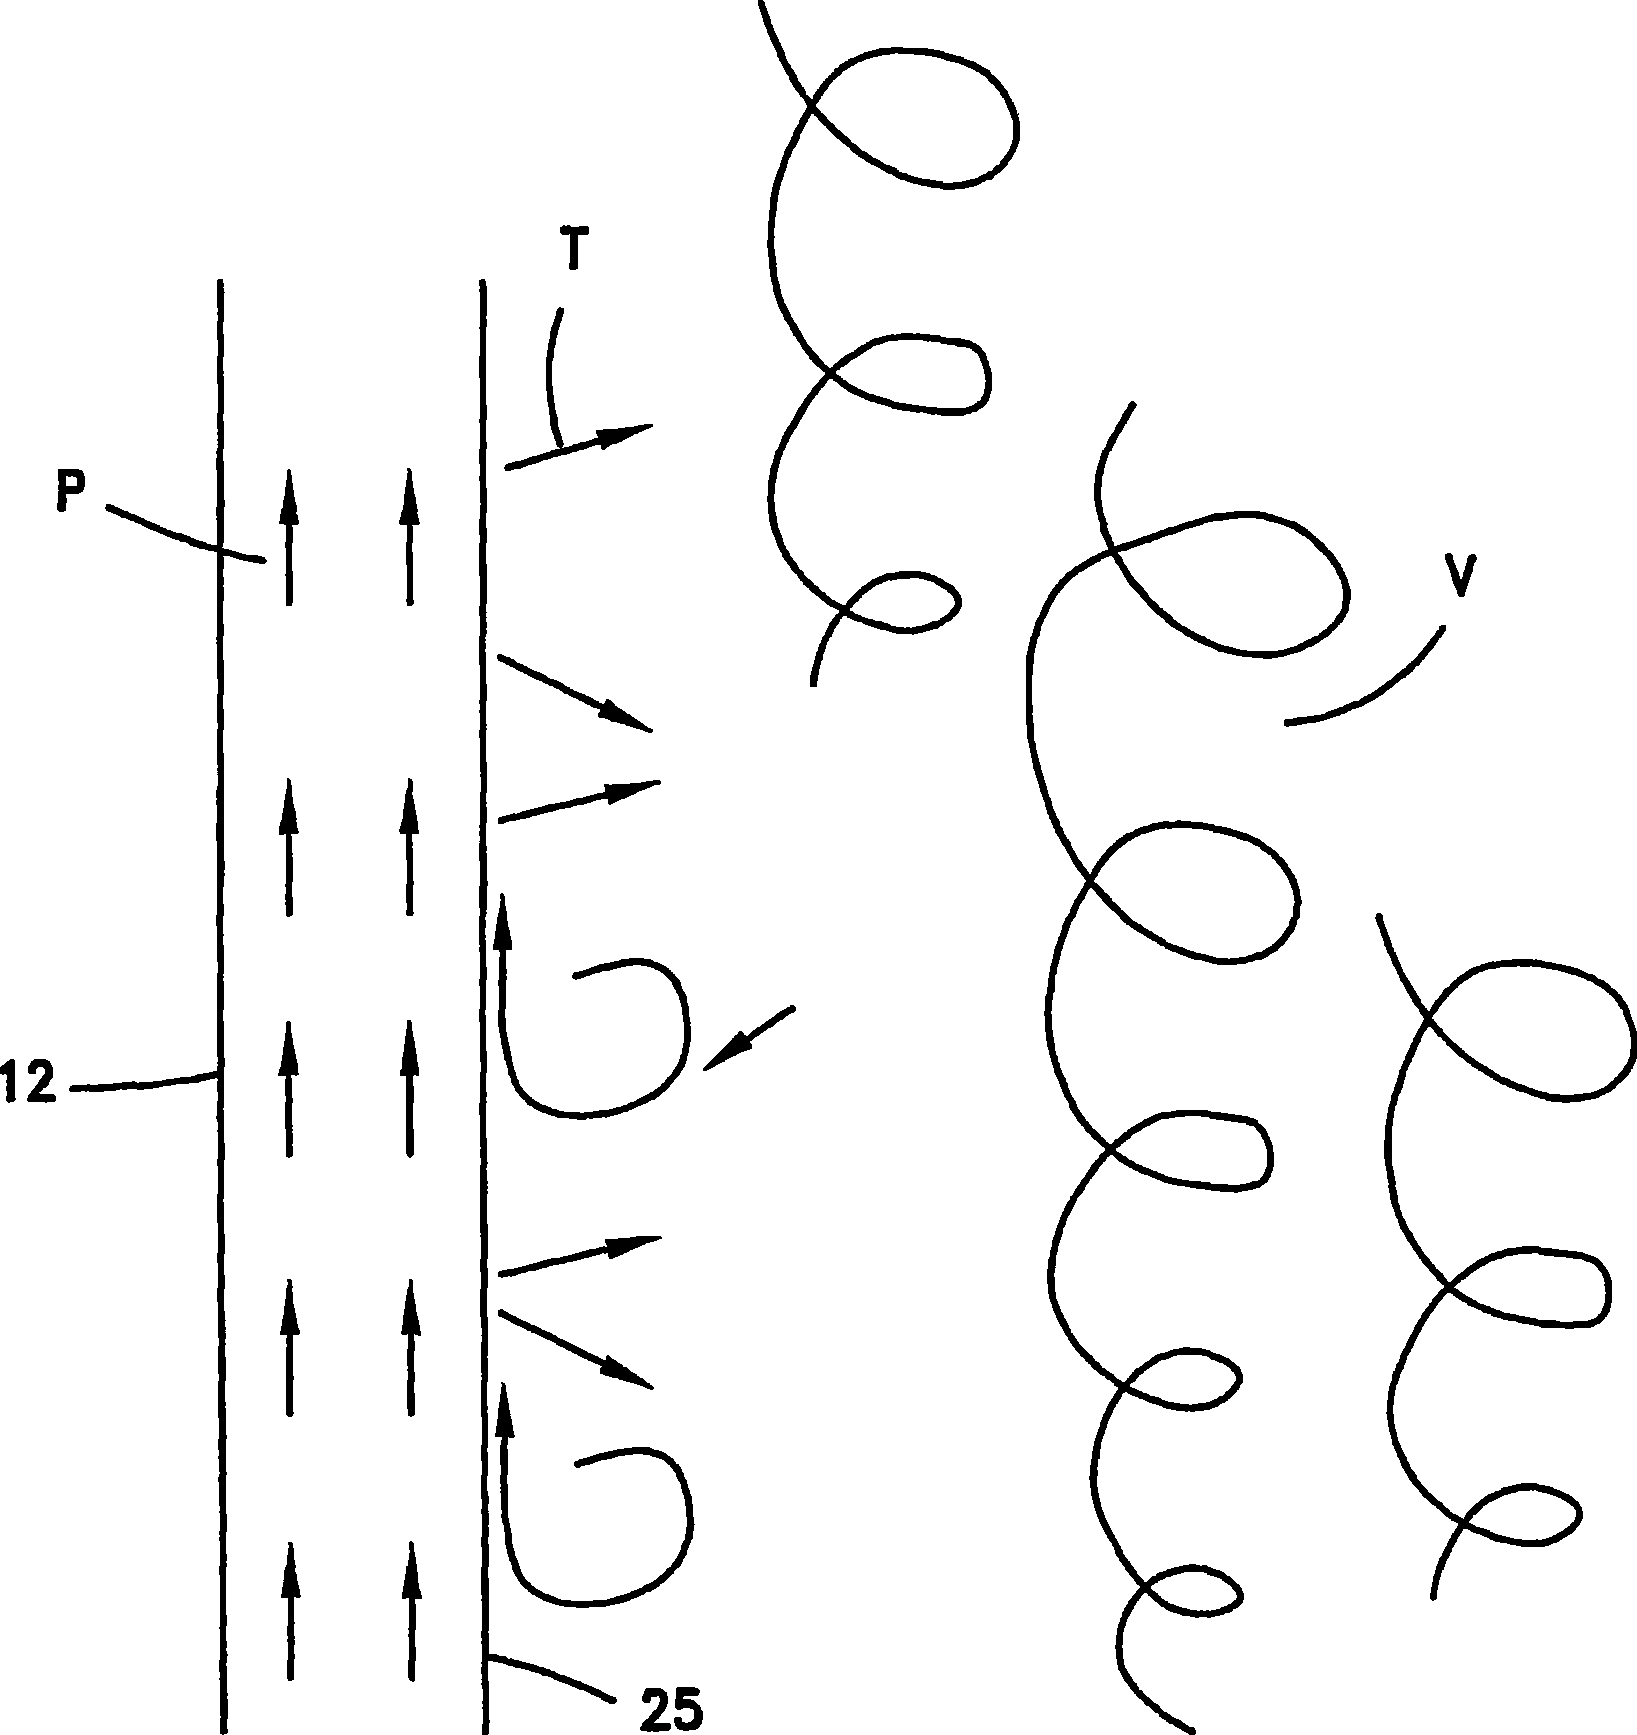 Apparatus and method for the removal of gaseous pollutants from an upwardly flowing gas stream